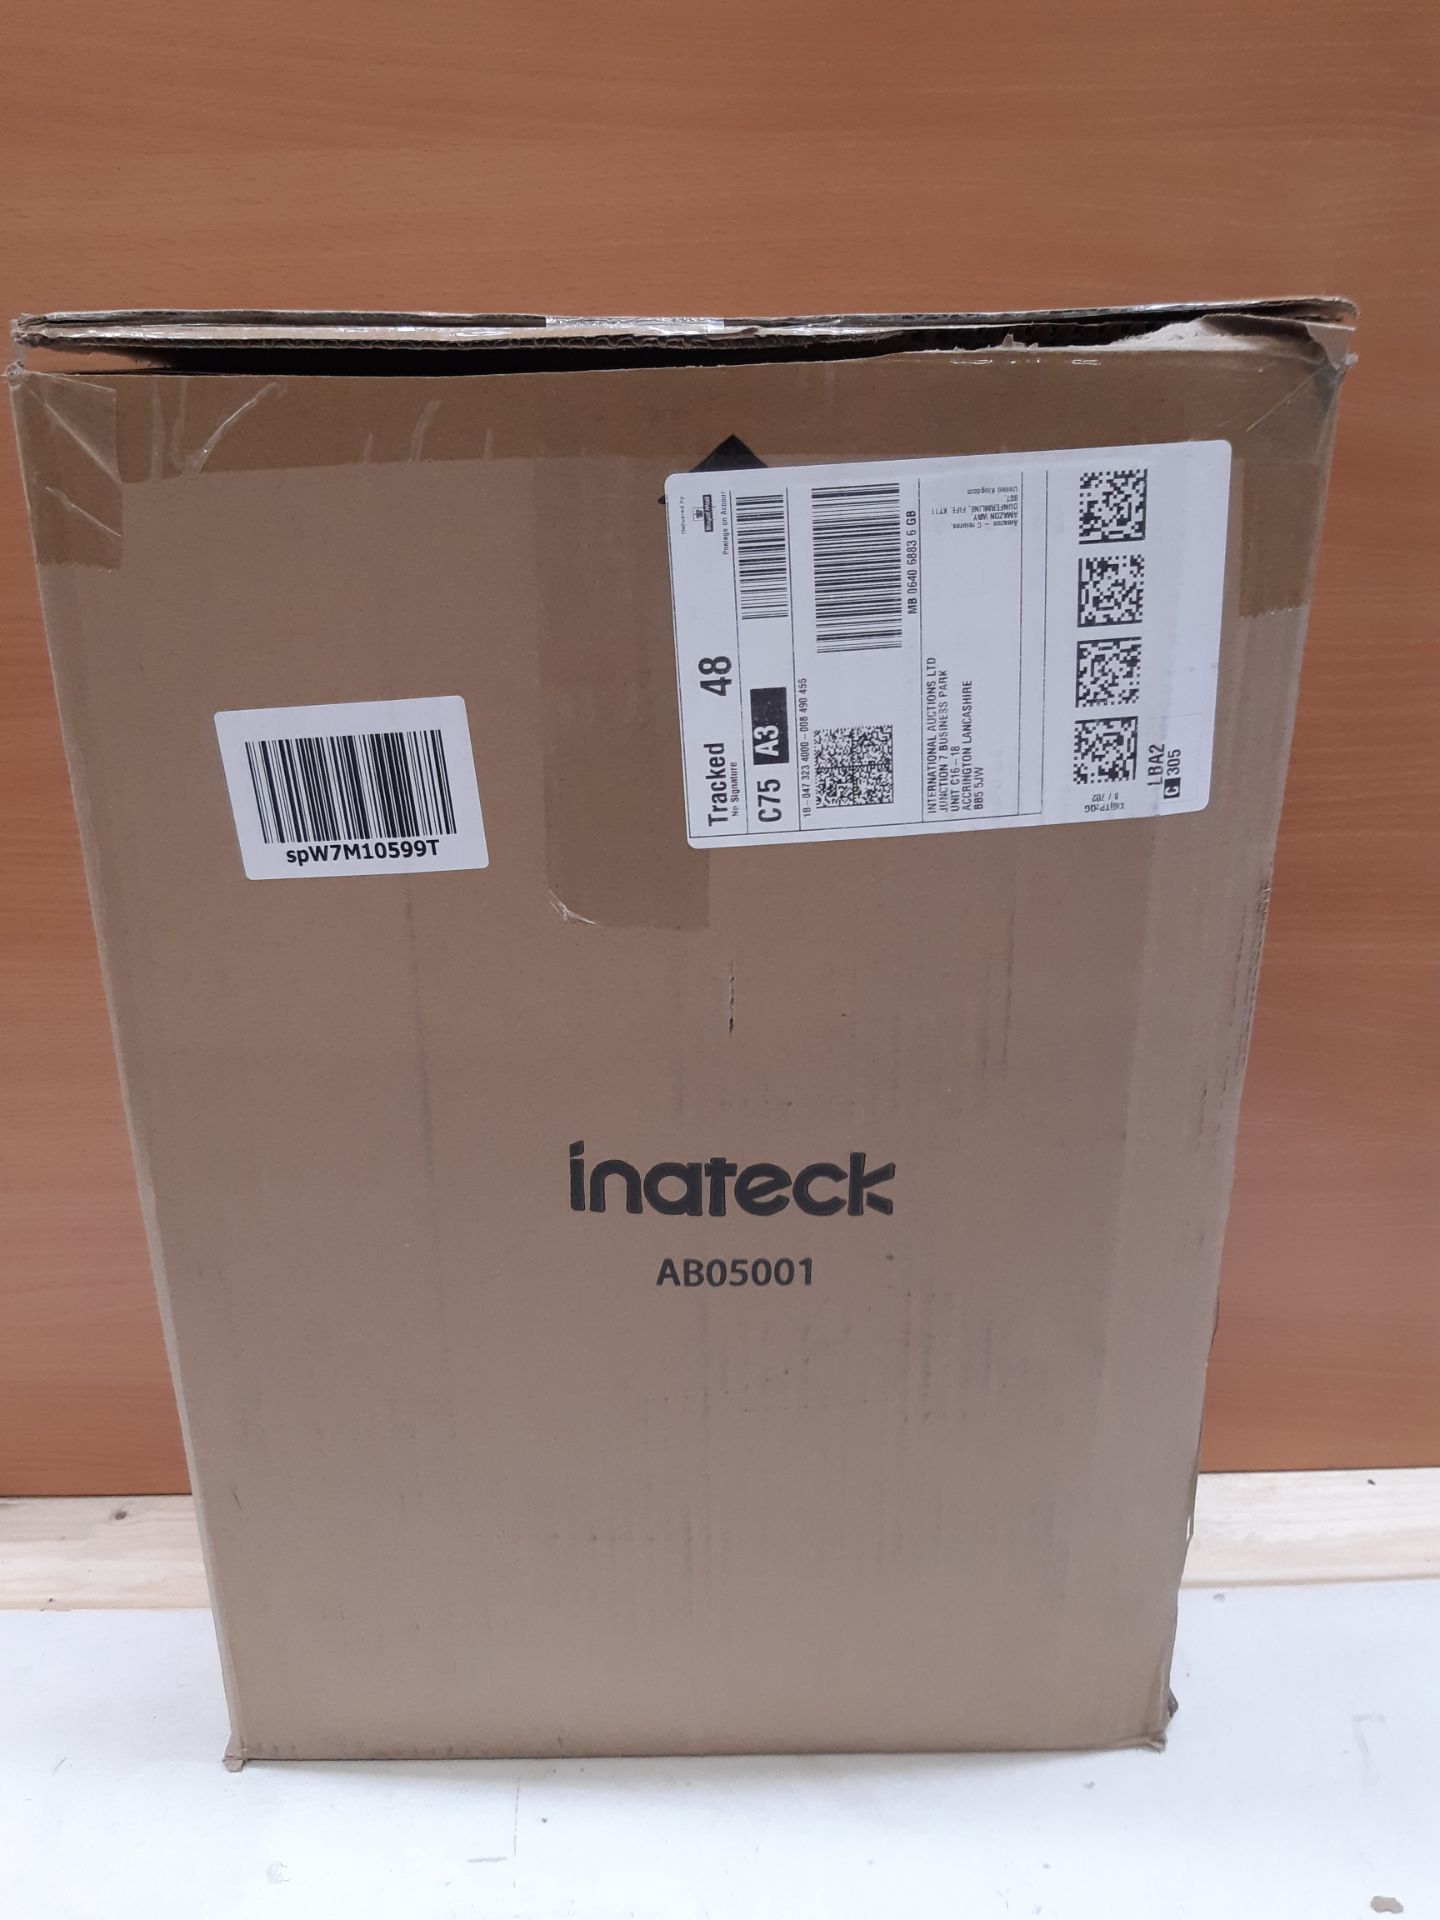 RRP £56.96 Inateck Shopping Trolley Lightweight Folding Shopping - Image 2 of 2